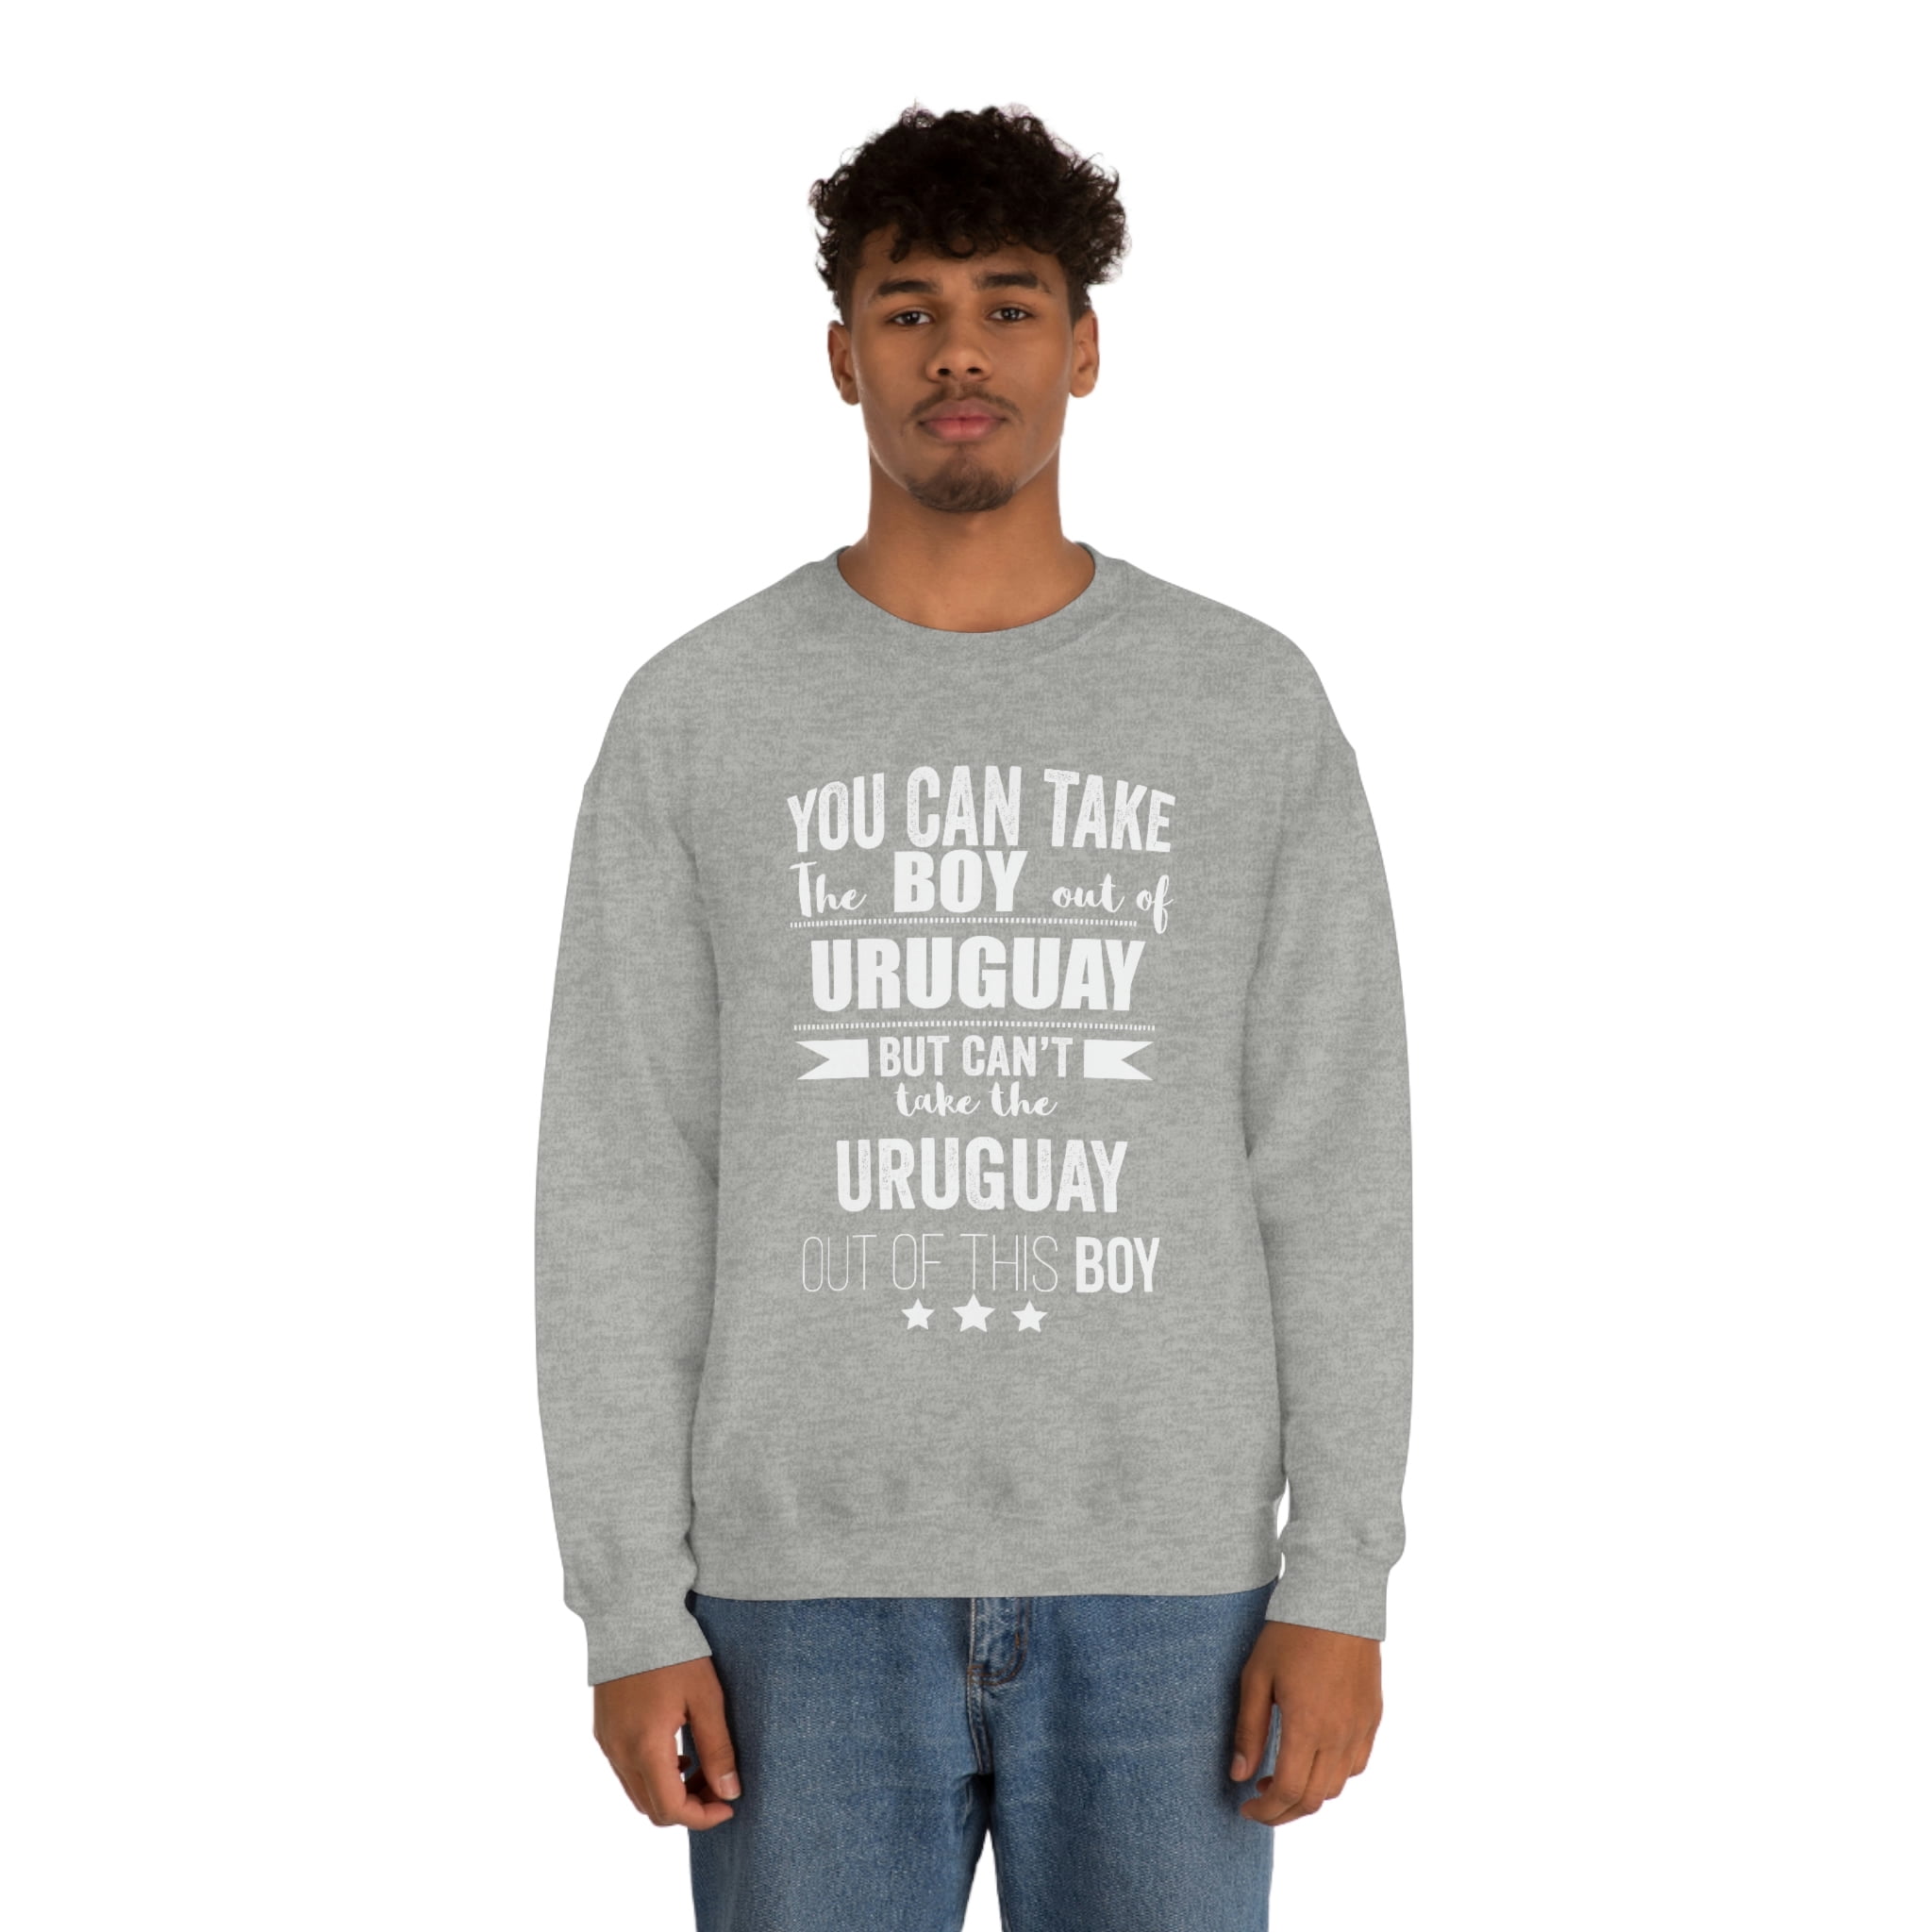 Can't take Uruguayan Pride out of the boy Unisex Sweatshirt S-2XL